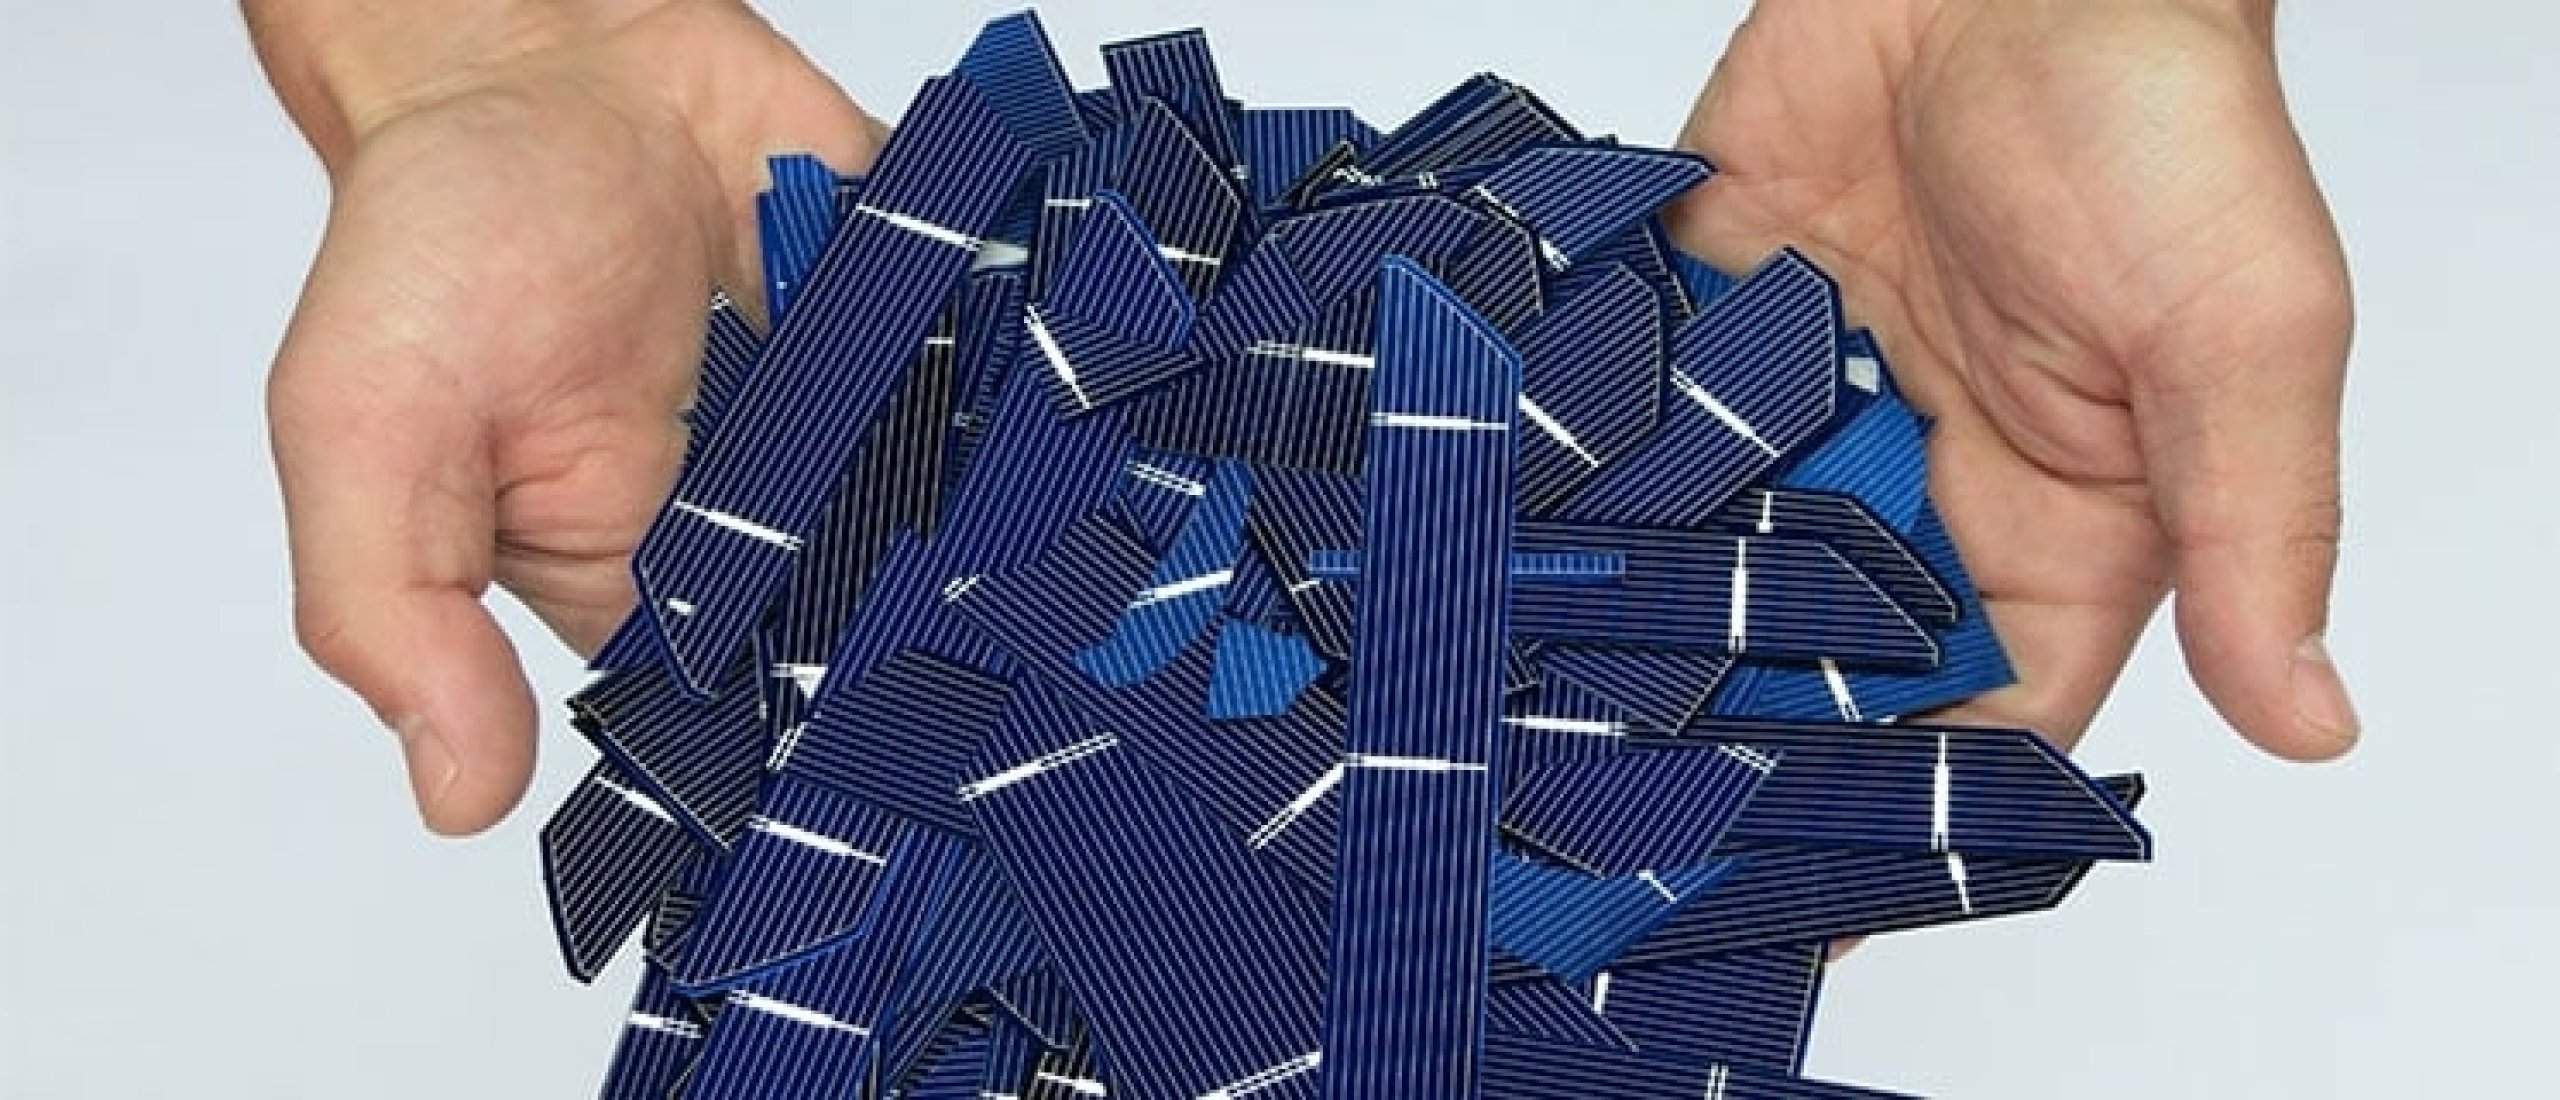 broken solar cells applications and recycling